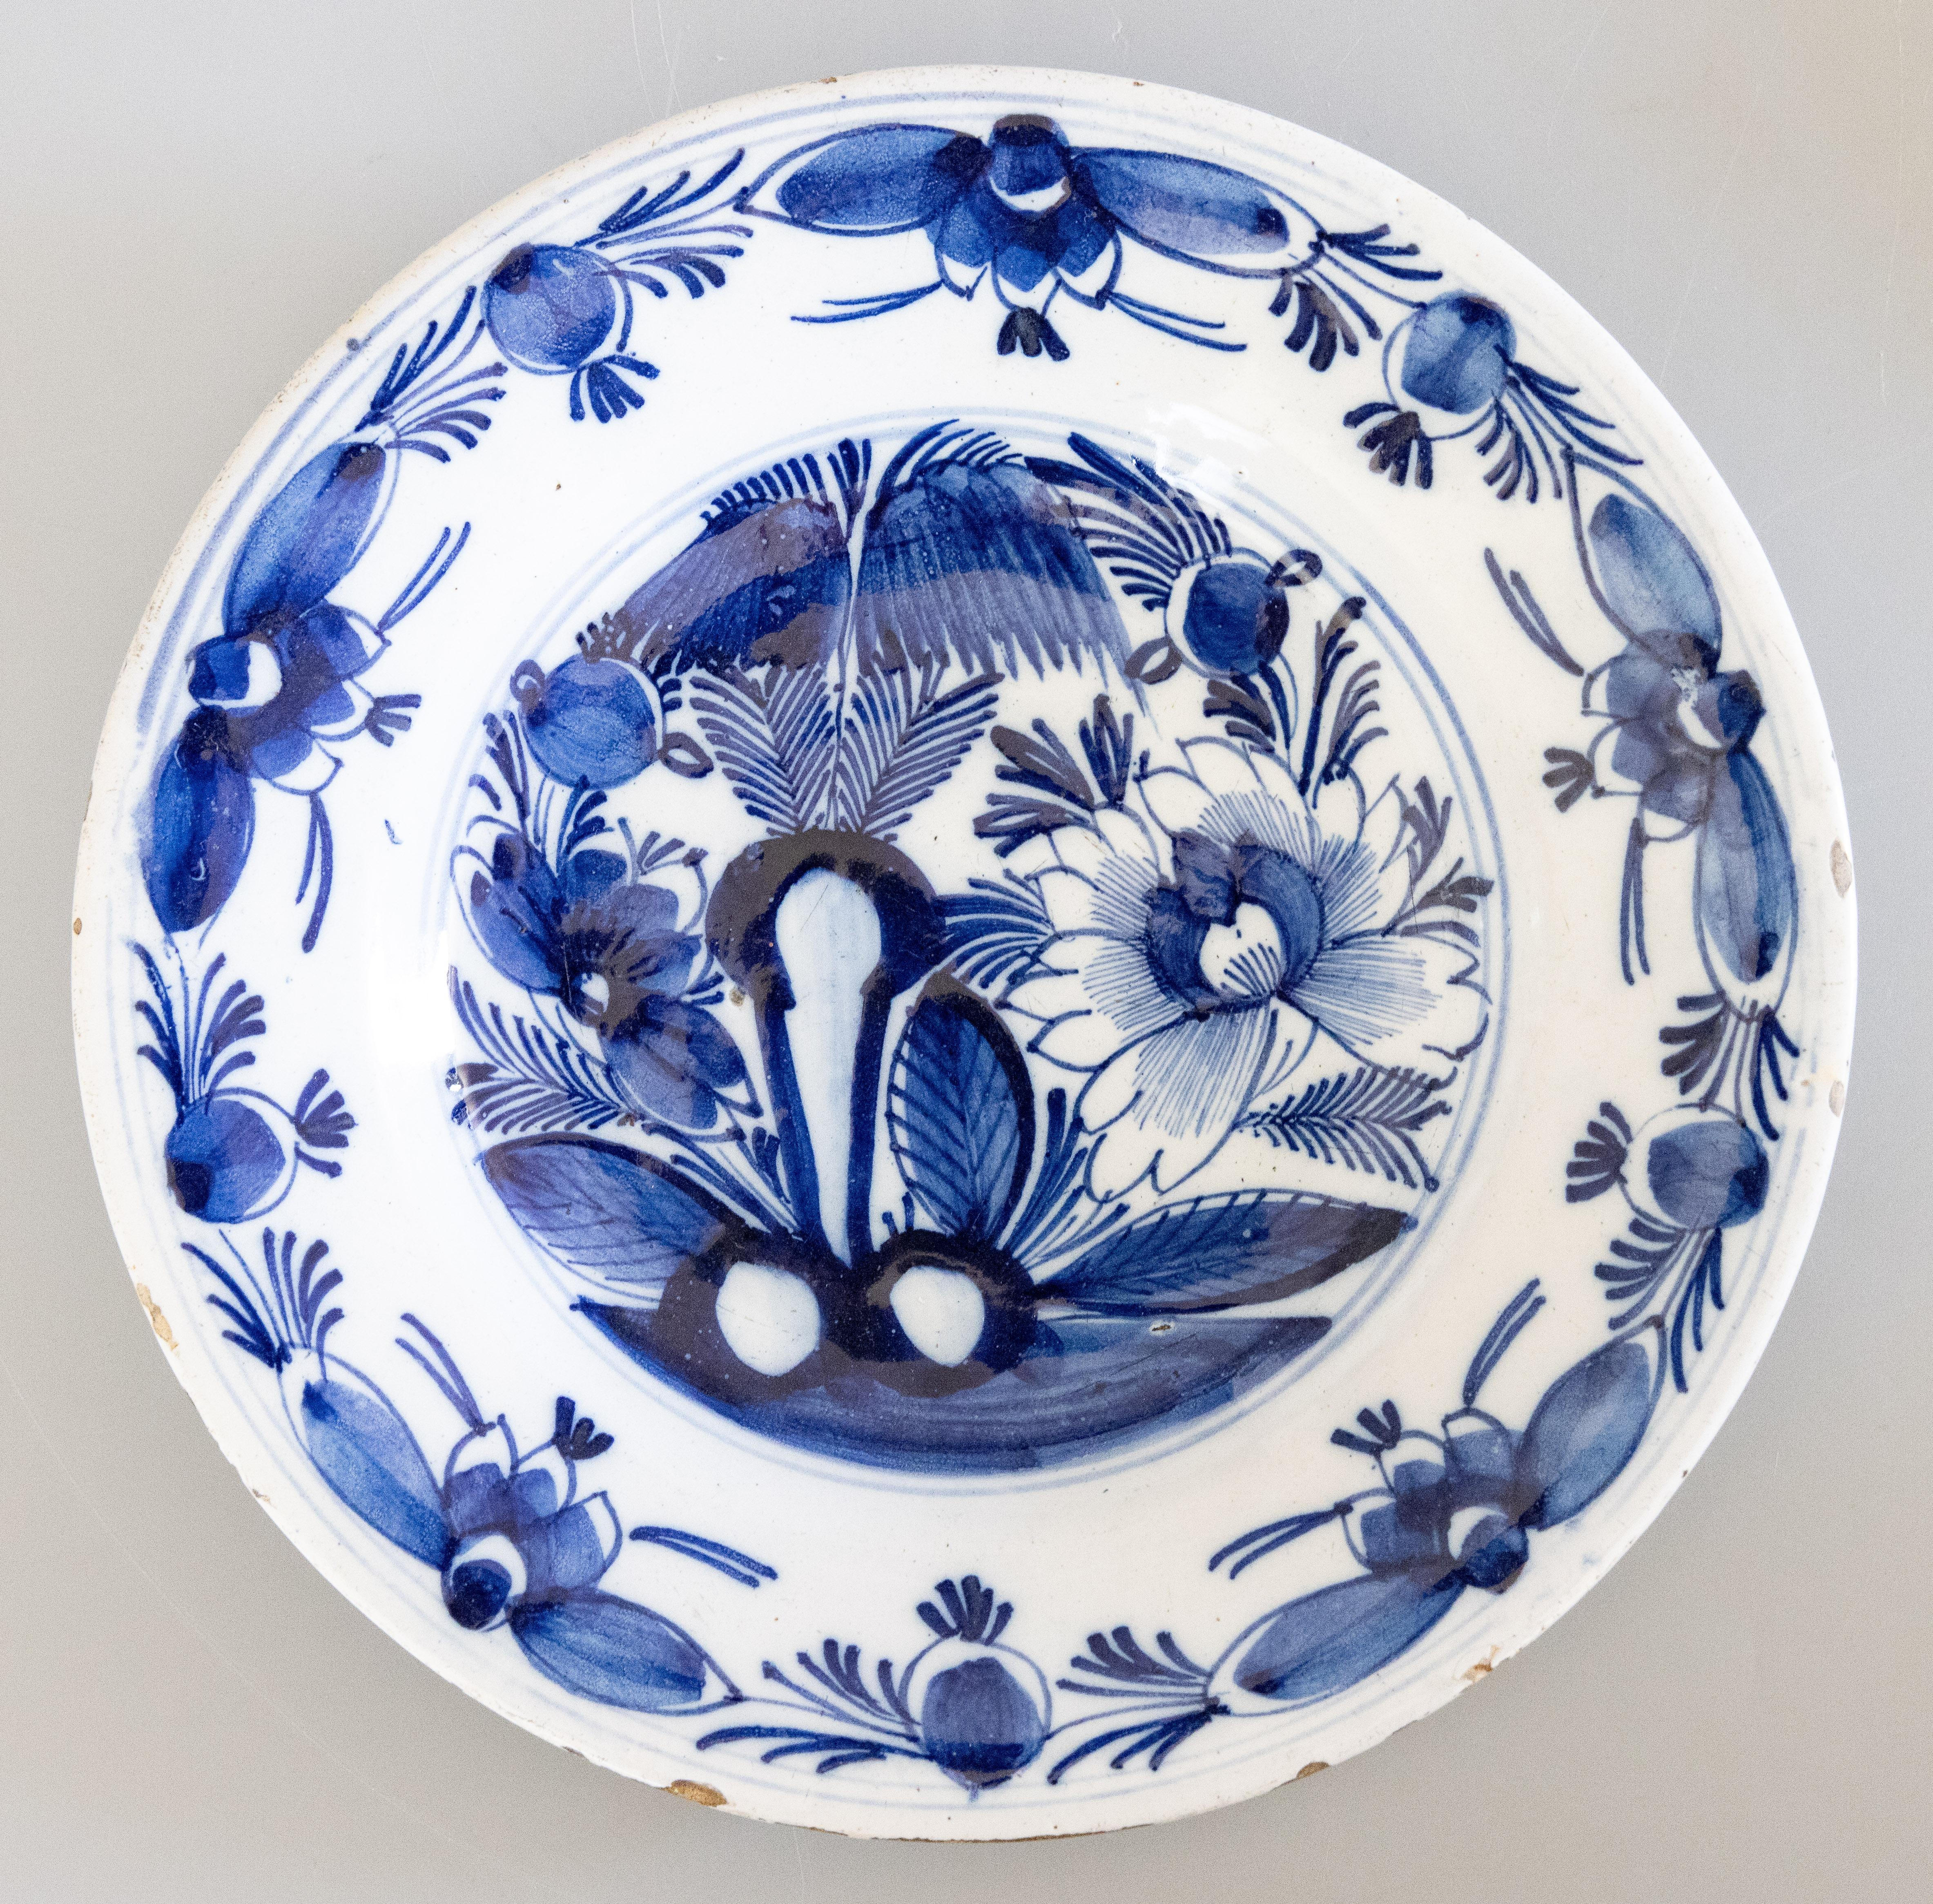 Antique 18th-Century Dutch Delft faience flower plates, featuring an oversized peony, willow tree, and hardscaping. The wide border reveals water lilies and budding flowers.